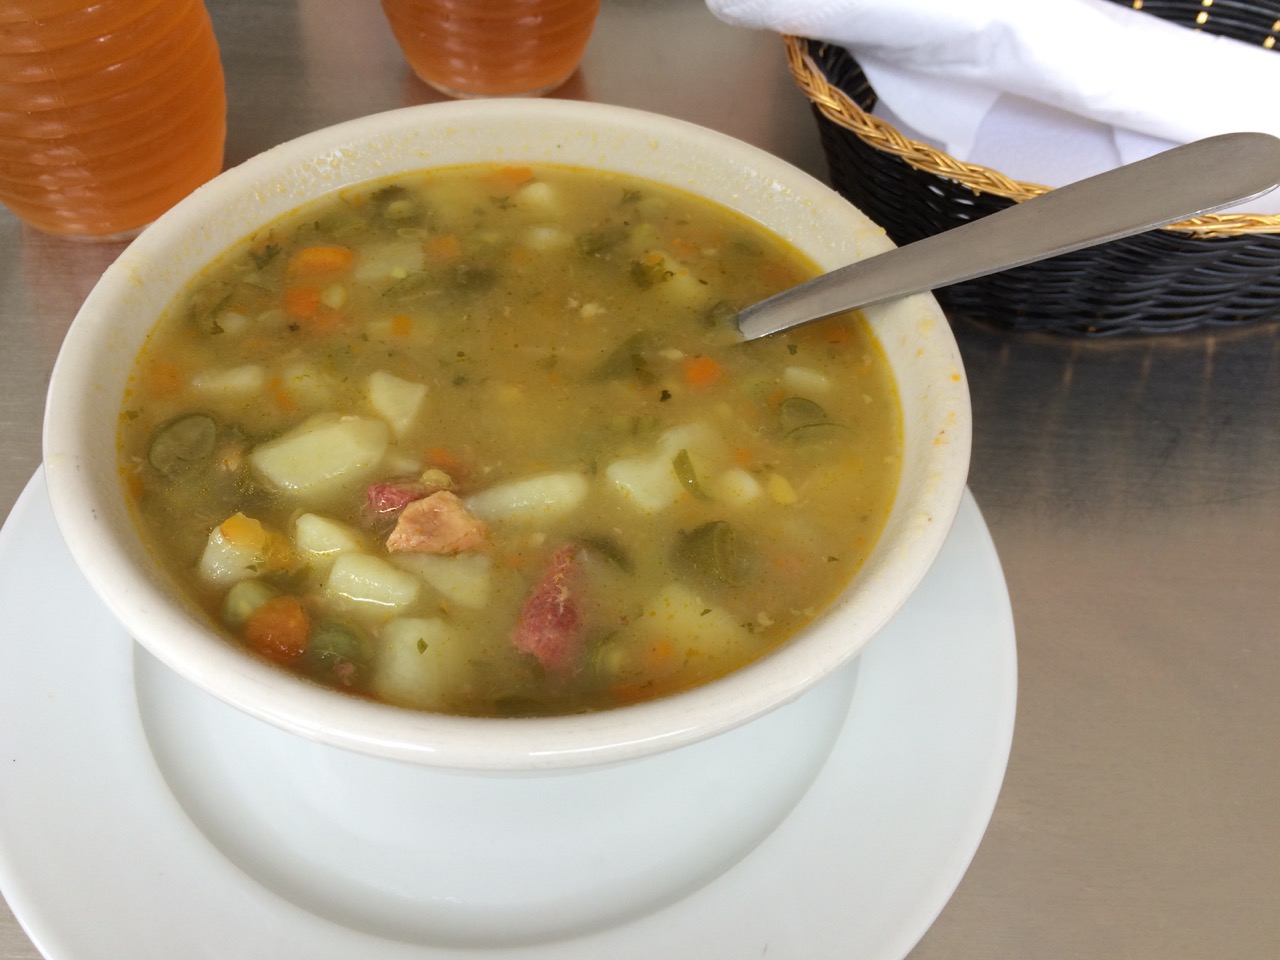 Great soup of unusual size